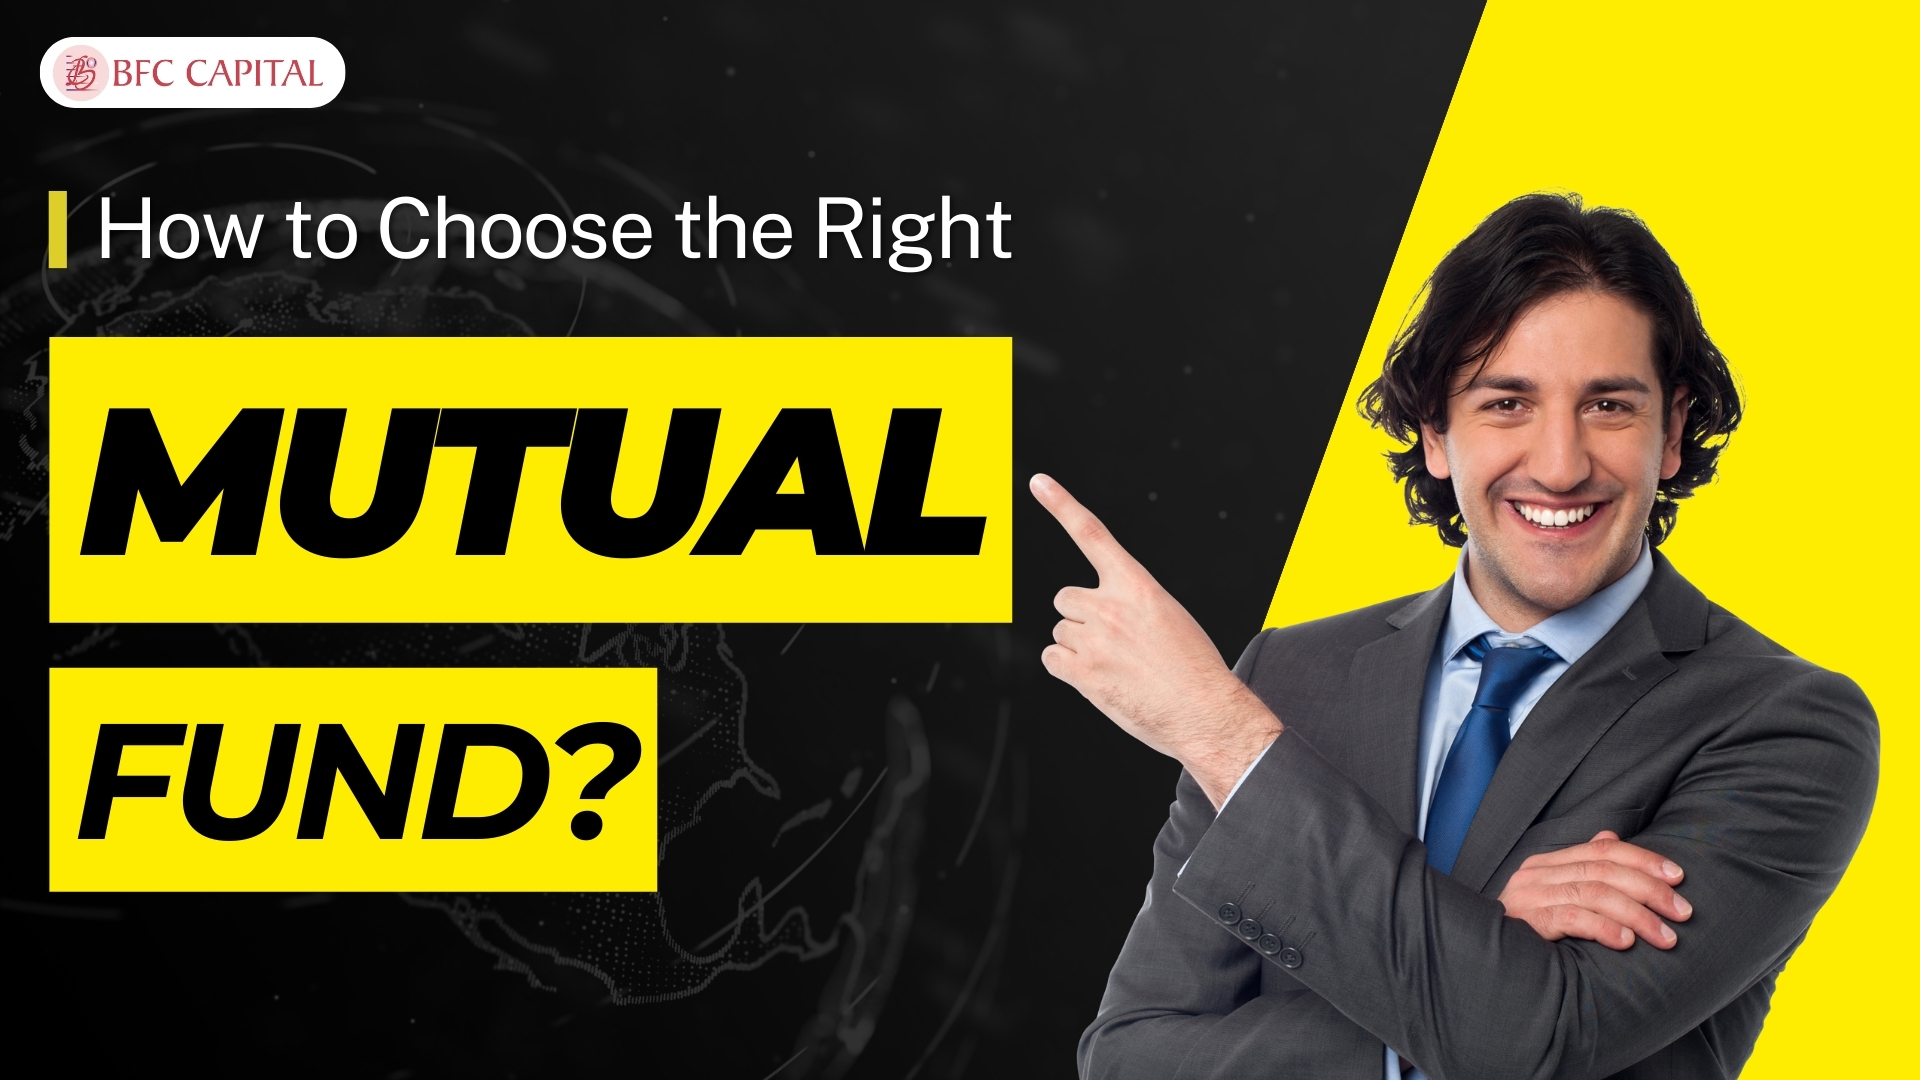 How to Choose the Right Mutual Fund?